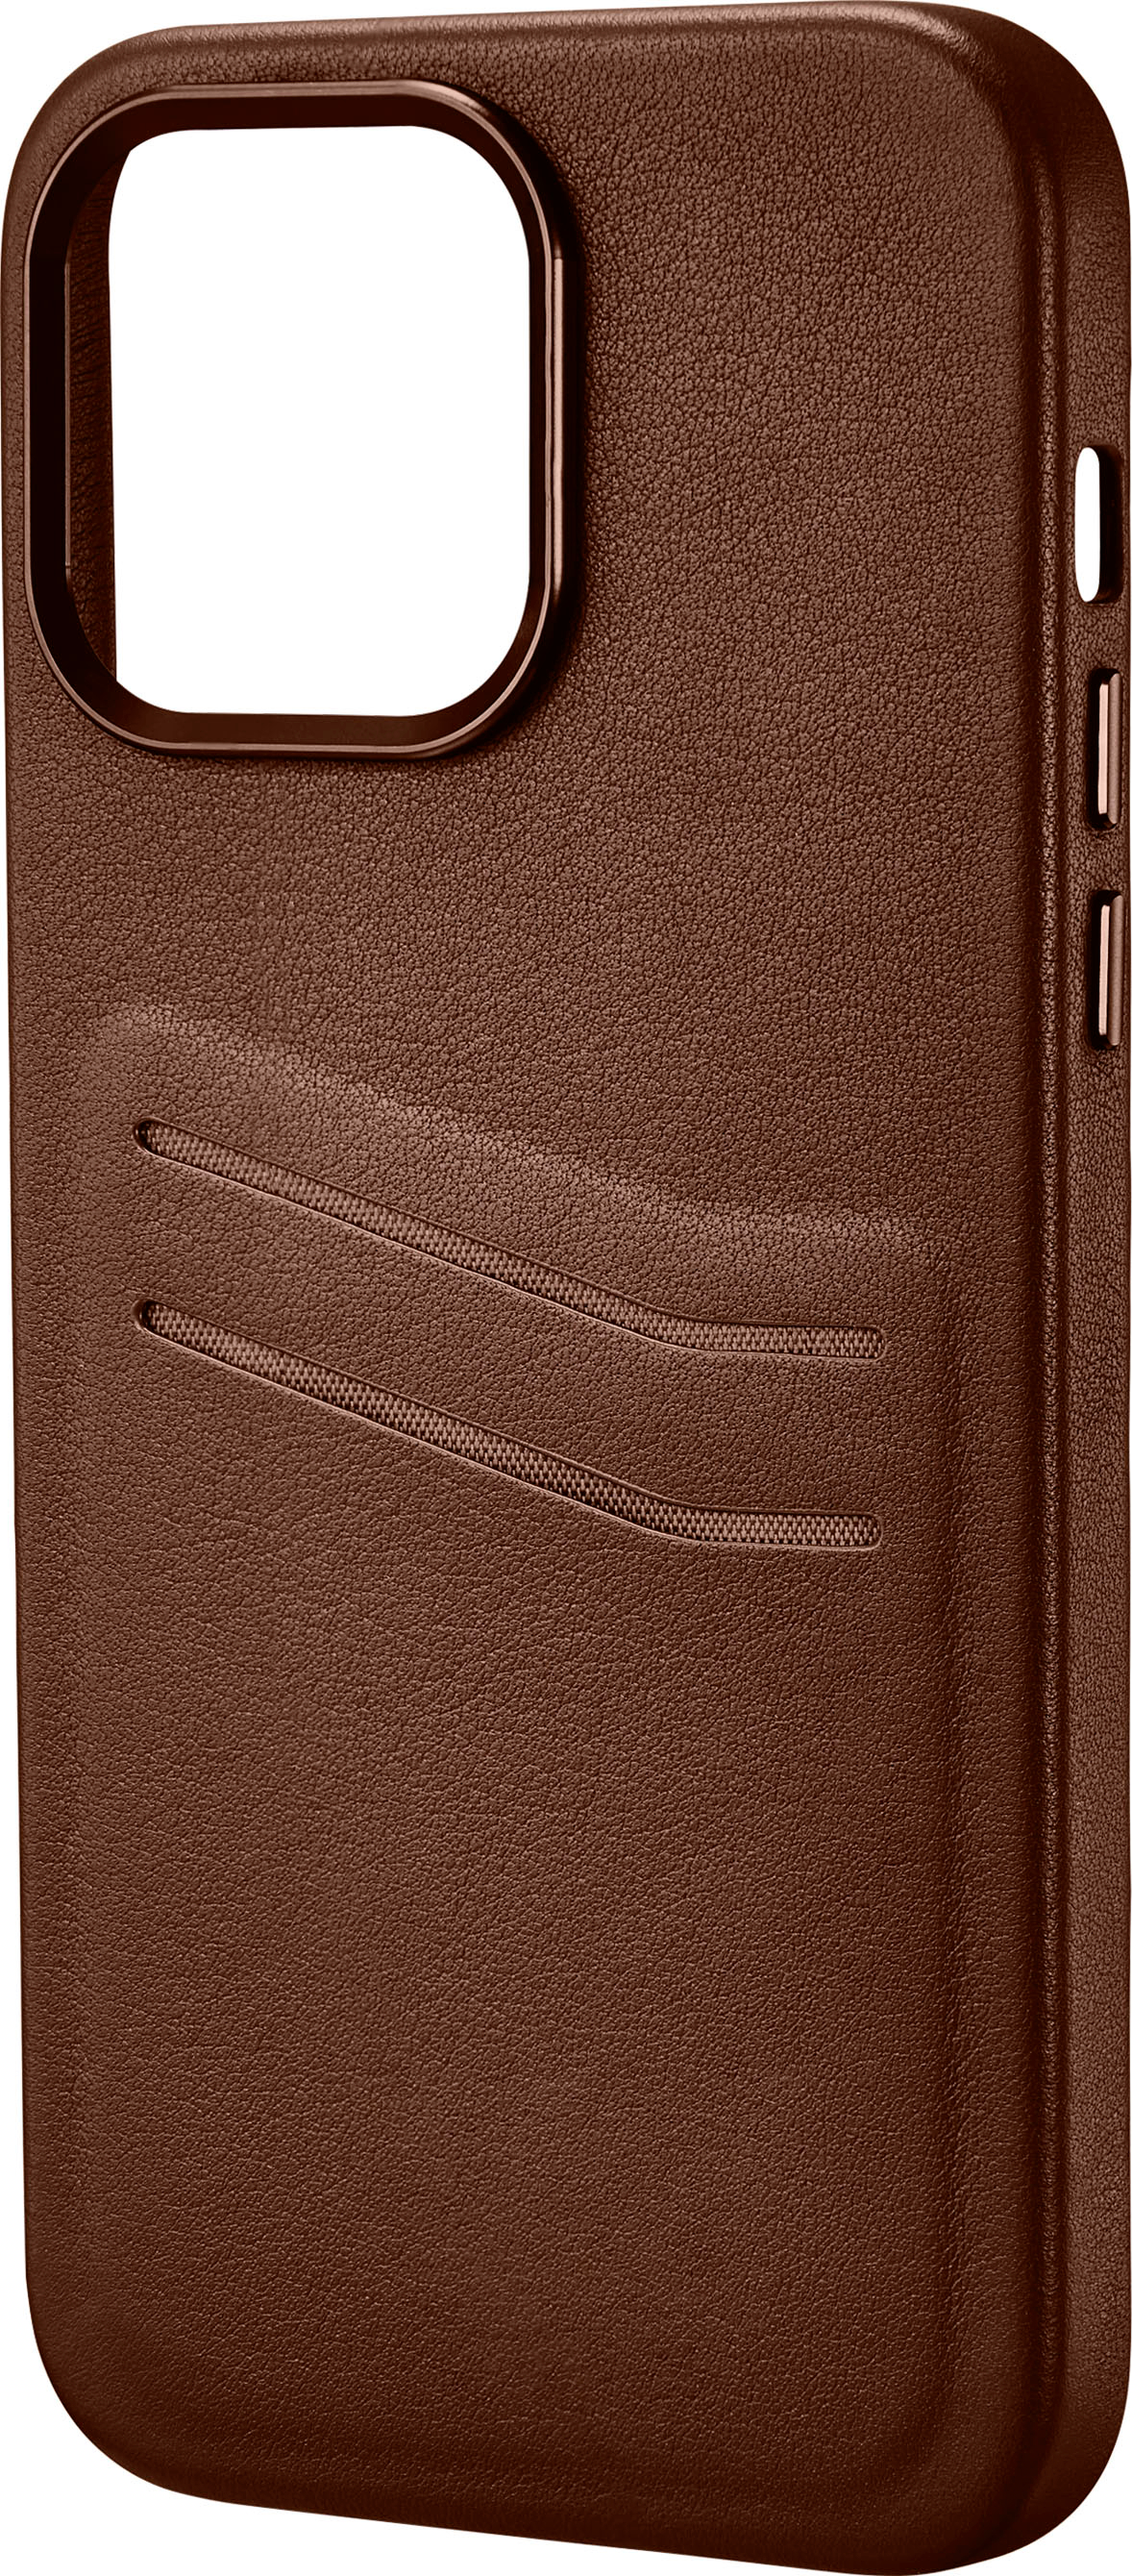 SaharaCase - Folio Wallet Case for Apple iPhone 12 Pro Max - Brown